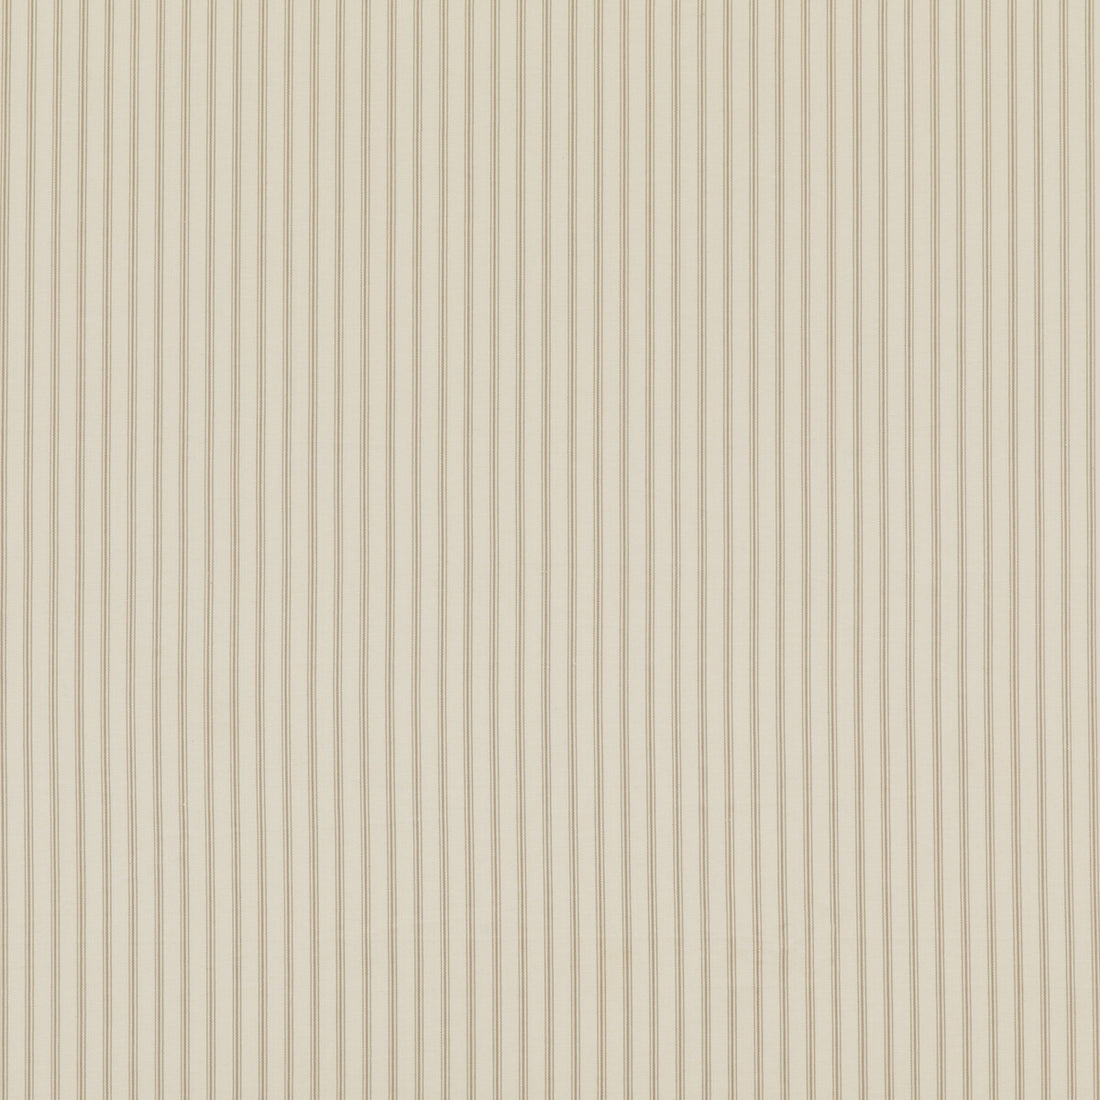 Renwick fabric in taupe color - pattern ED85300.210.0 - by Threads in the Great Stripes collection